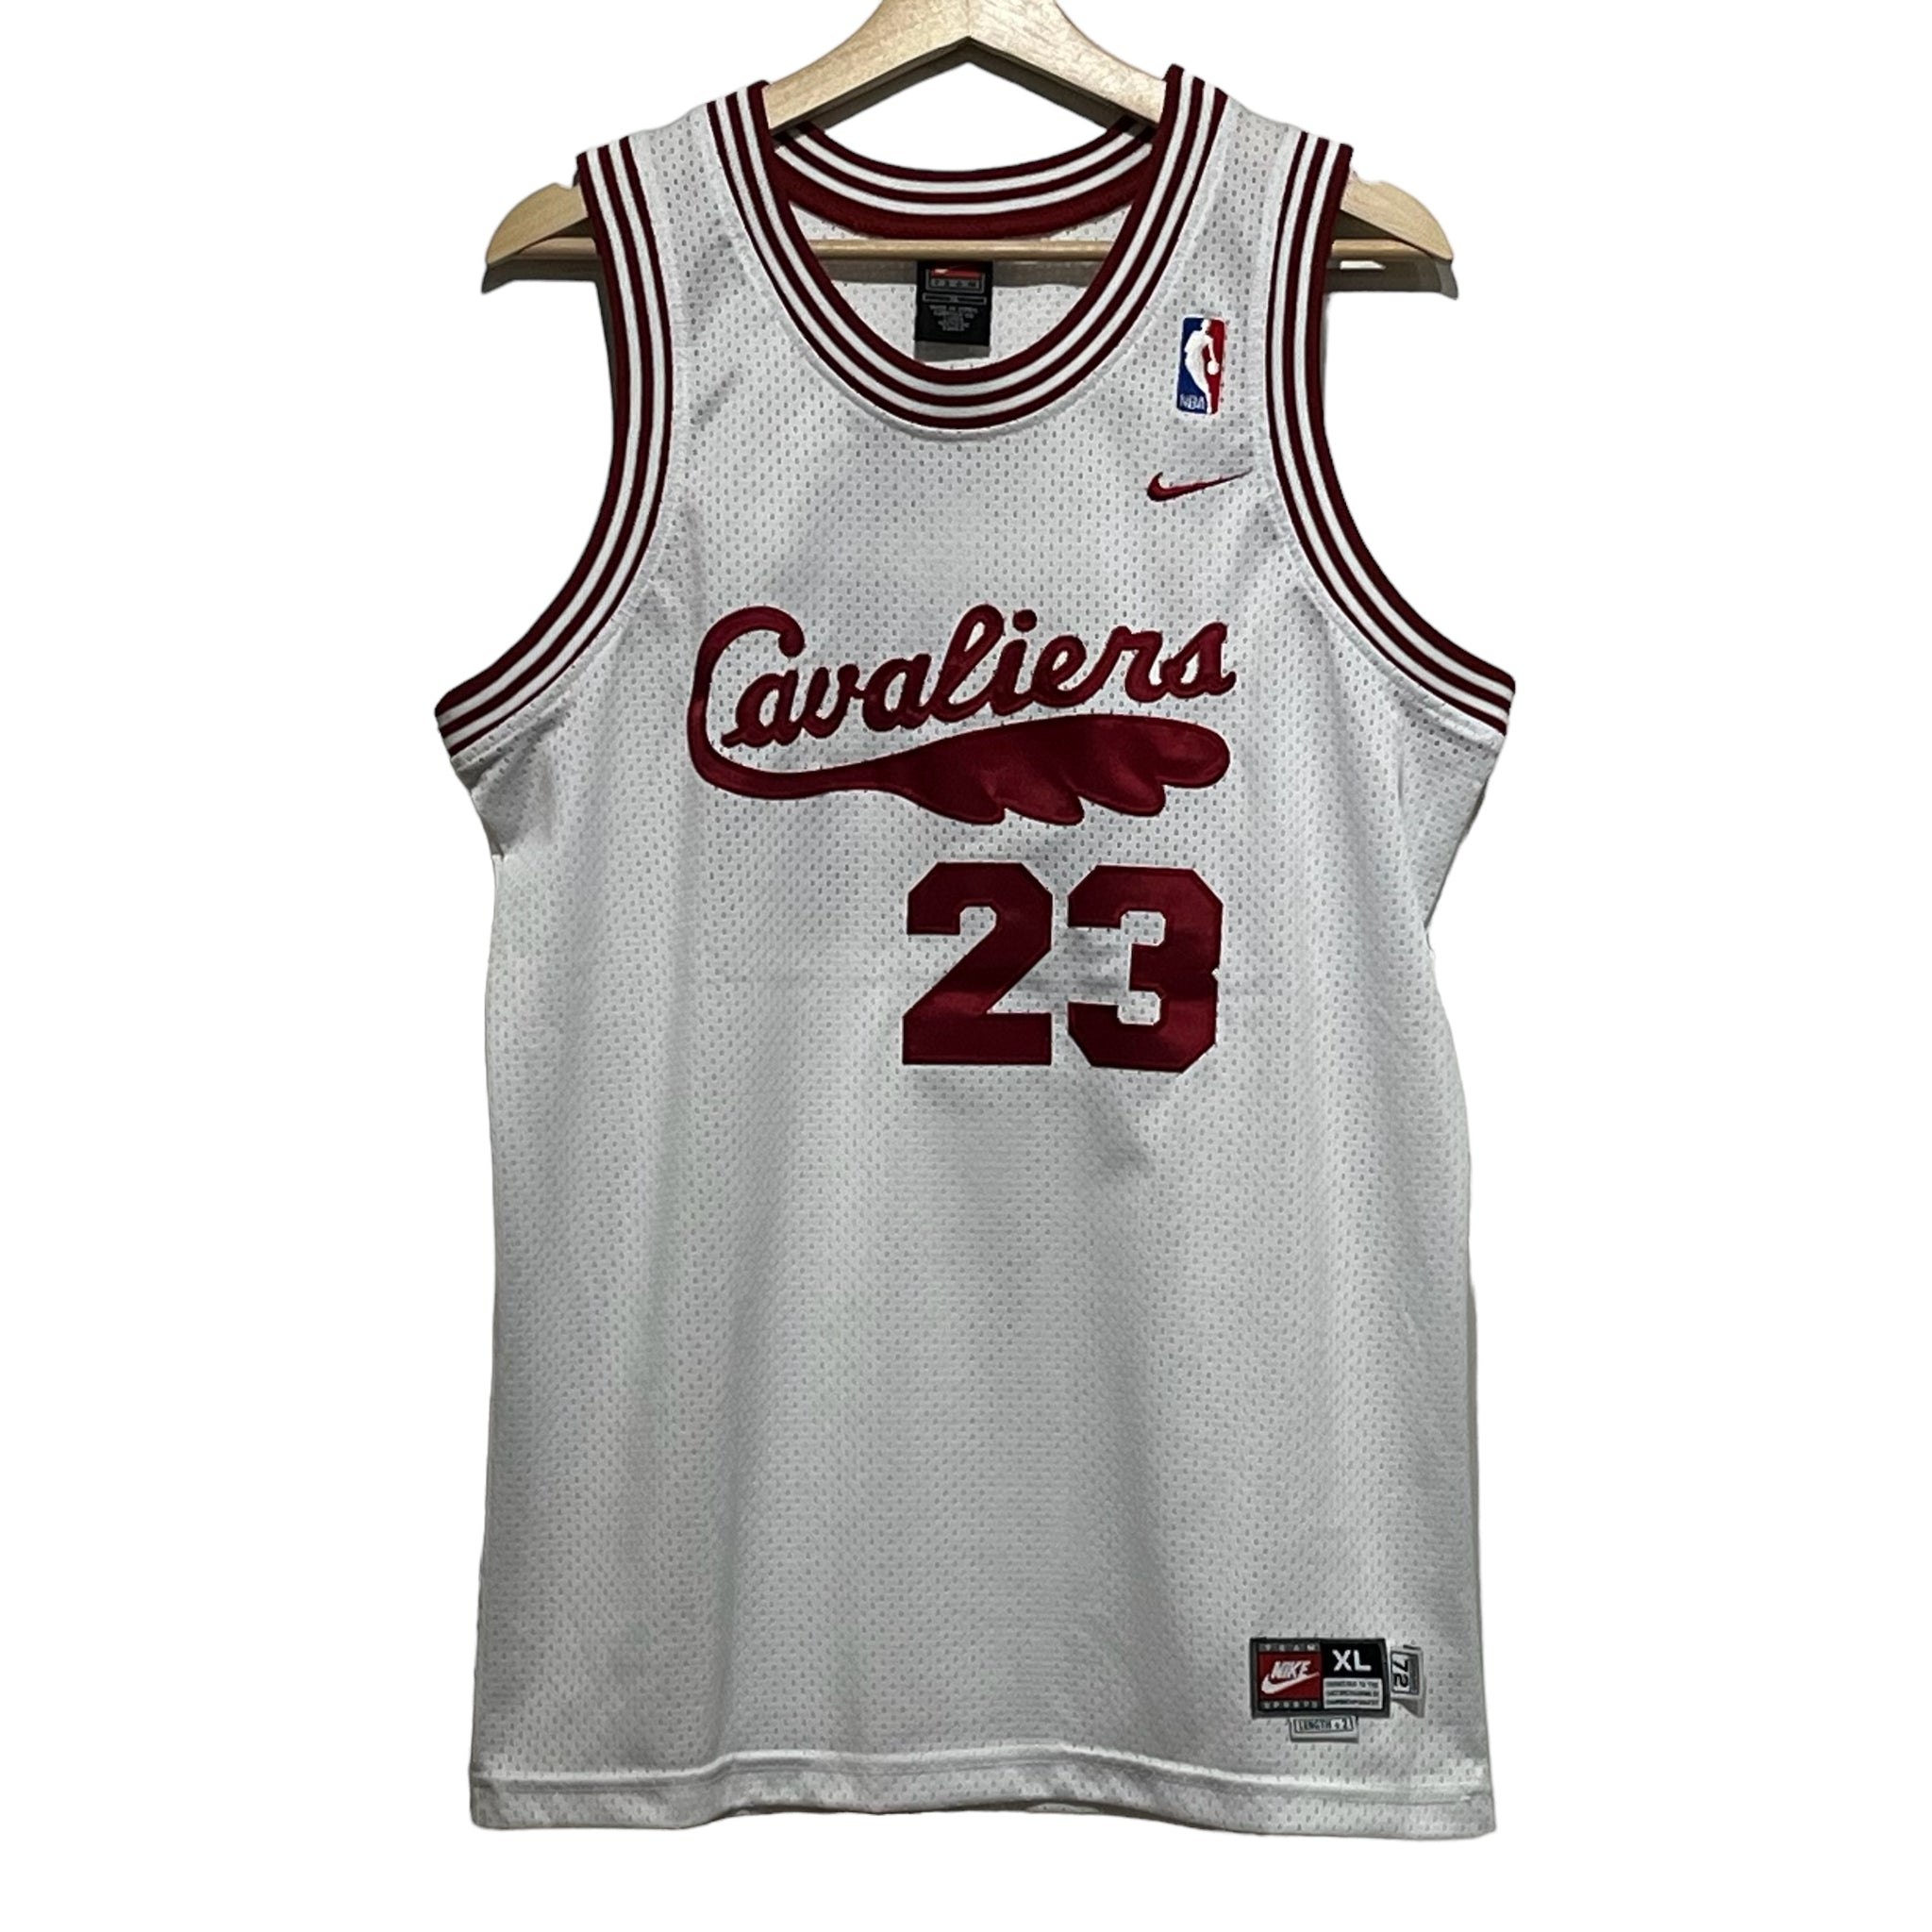  Cleveland Cavaliers Jersey